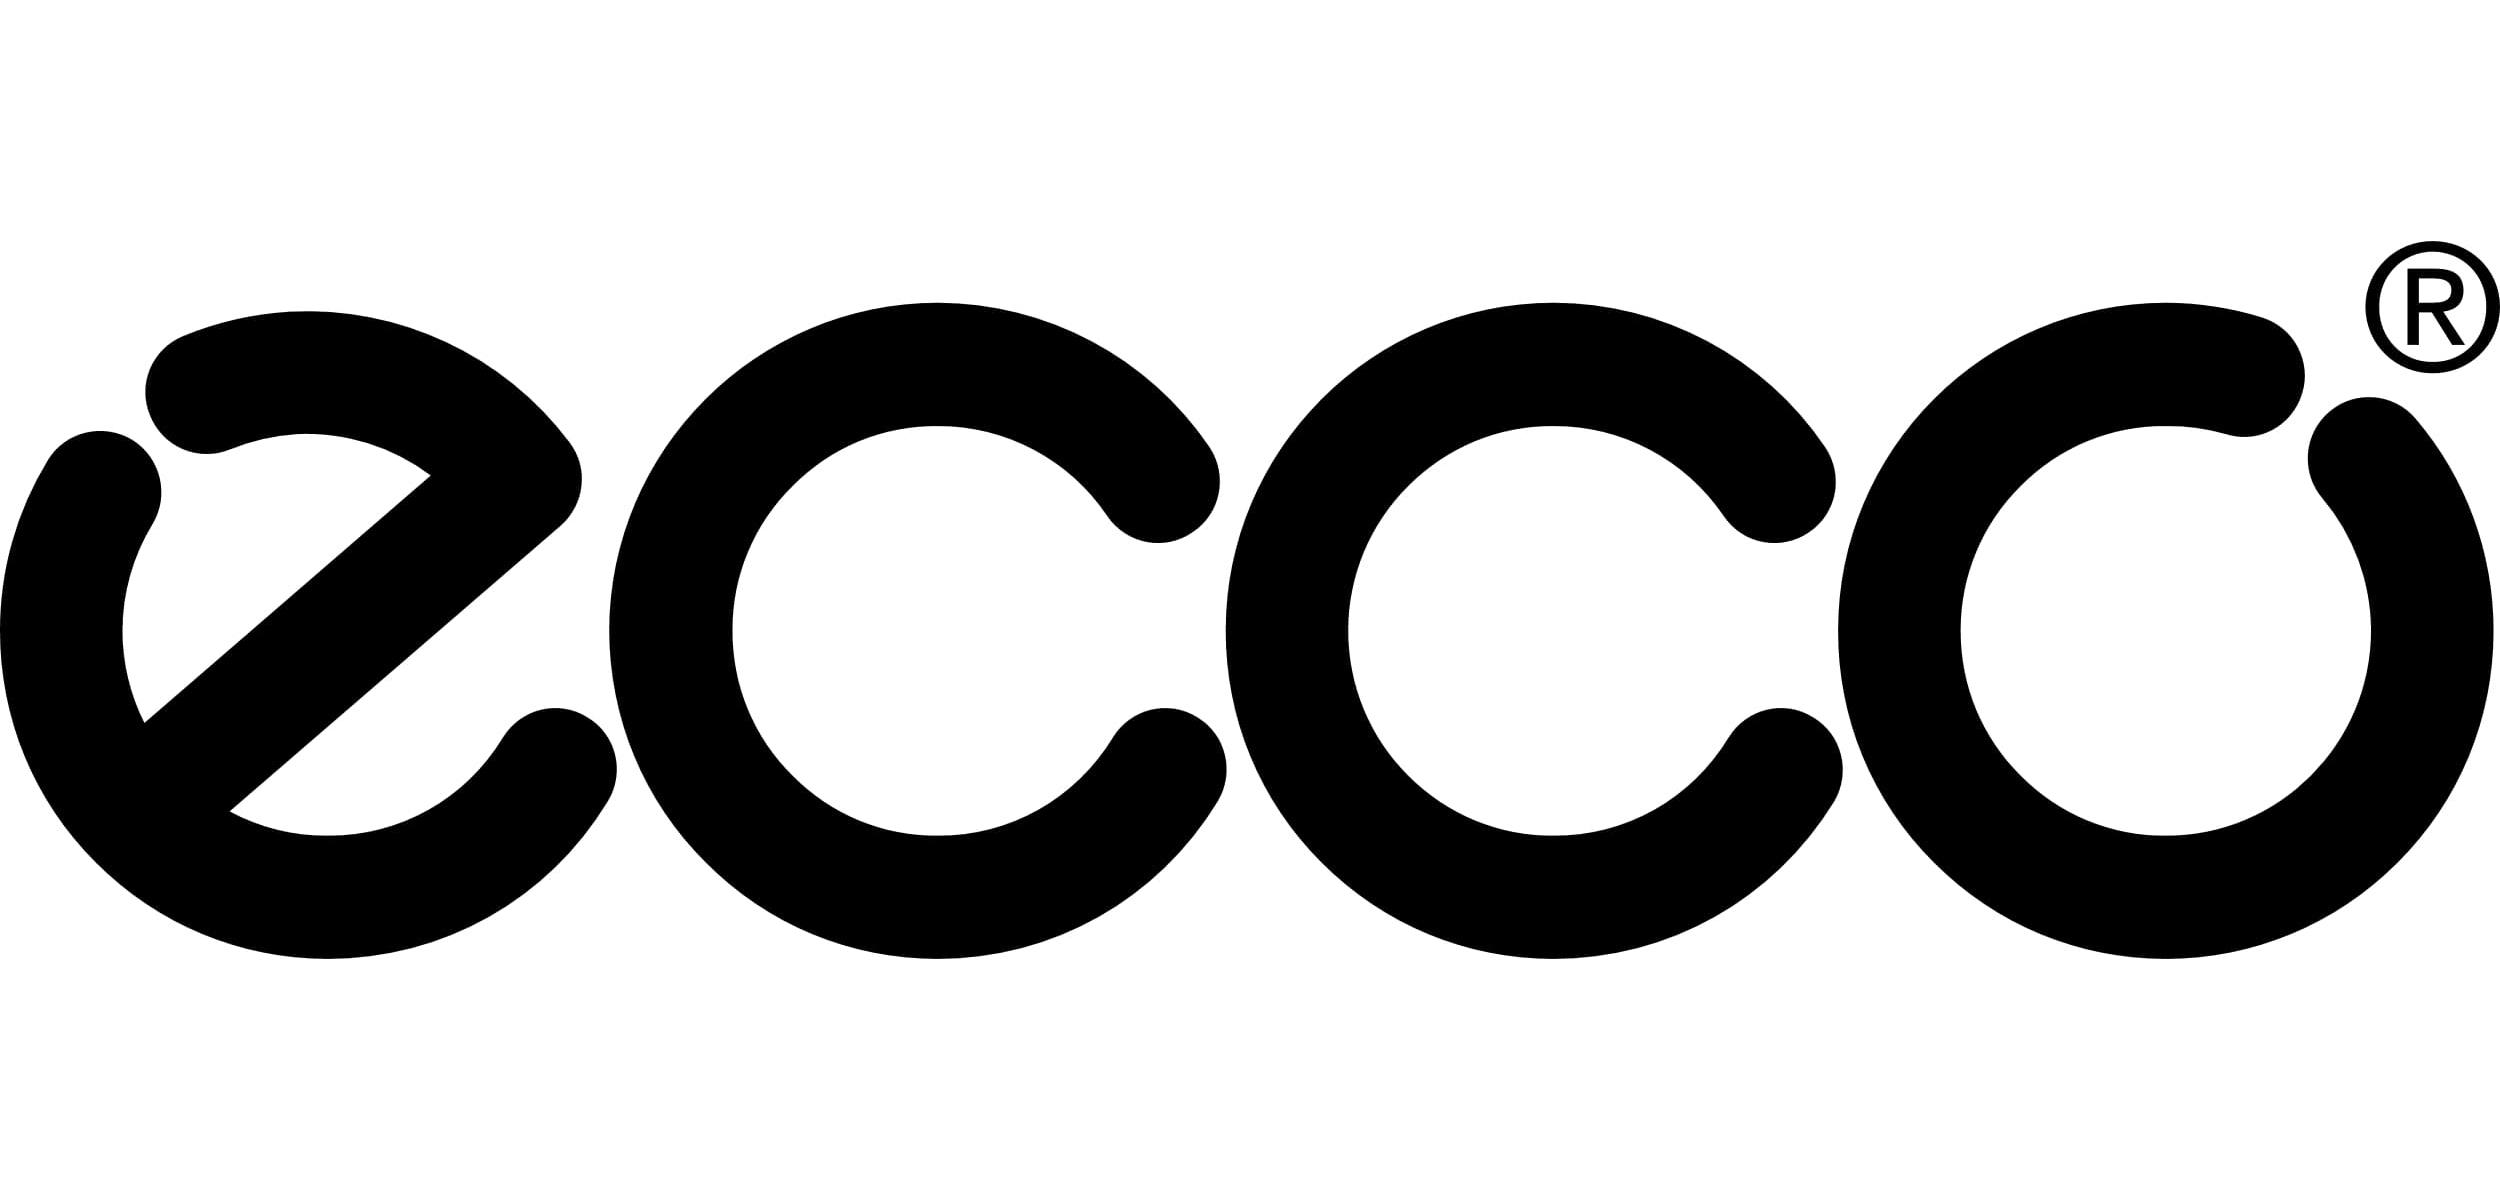 ECCO logo and symbol, meaning, brand